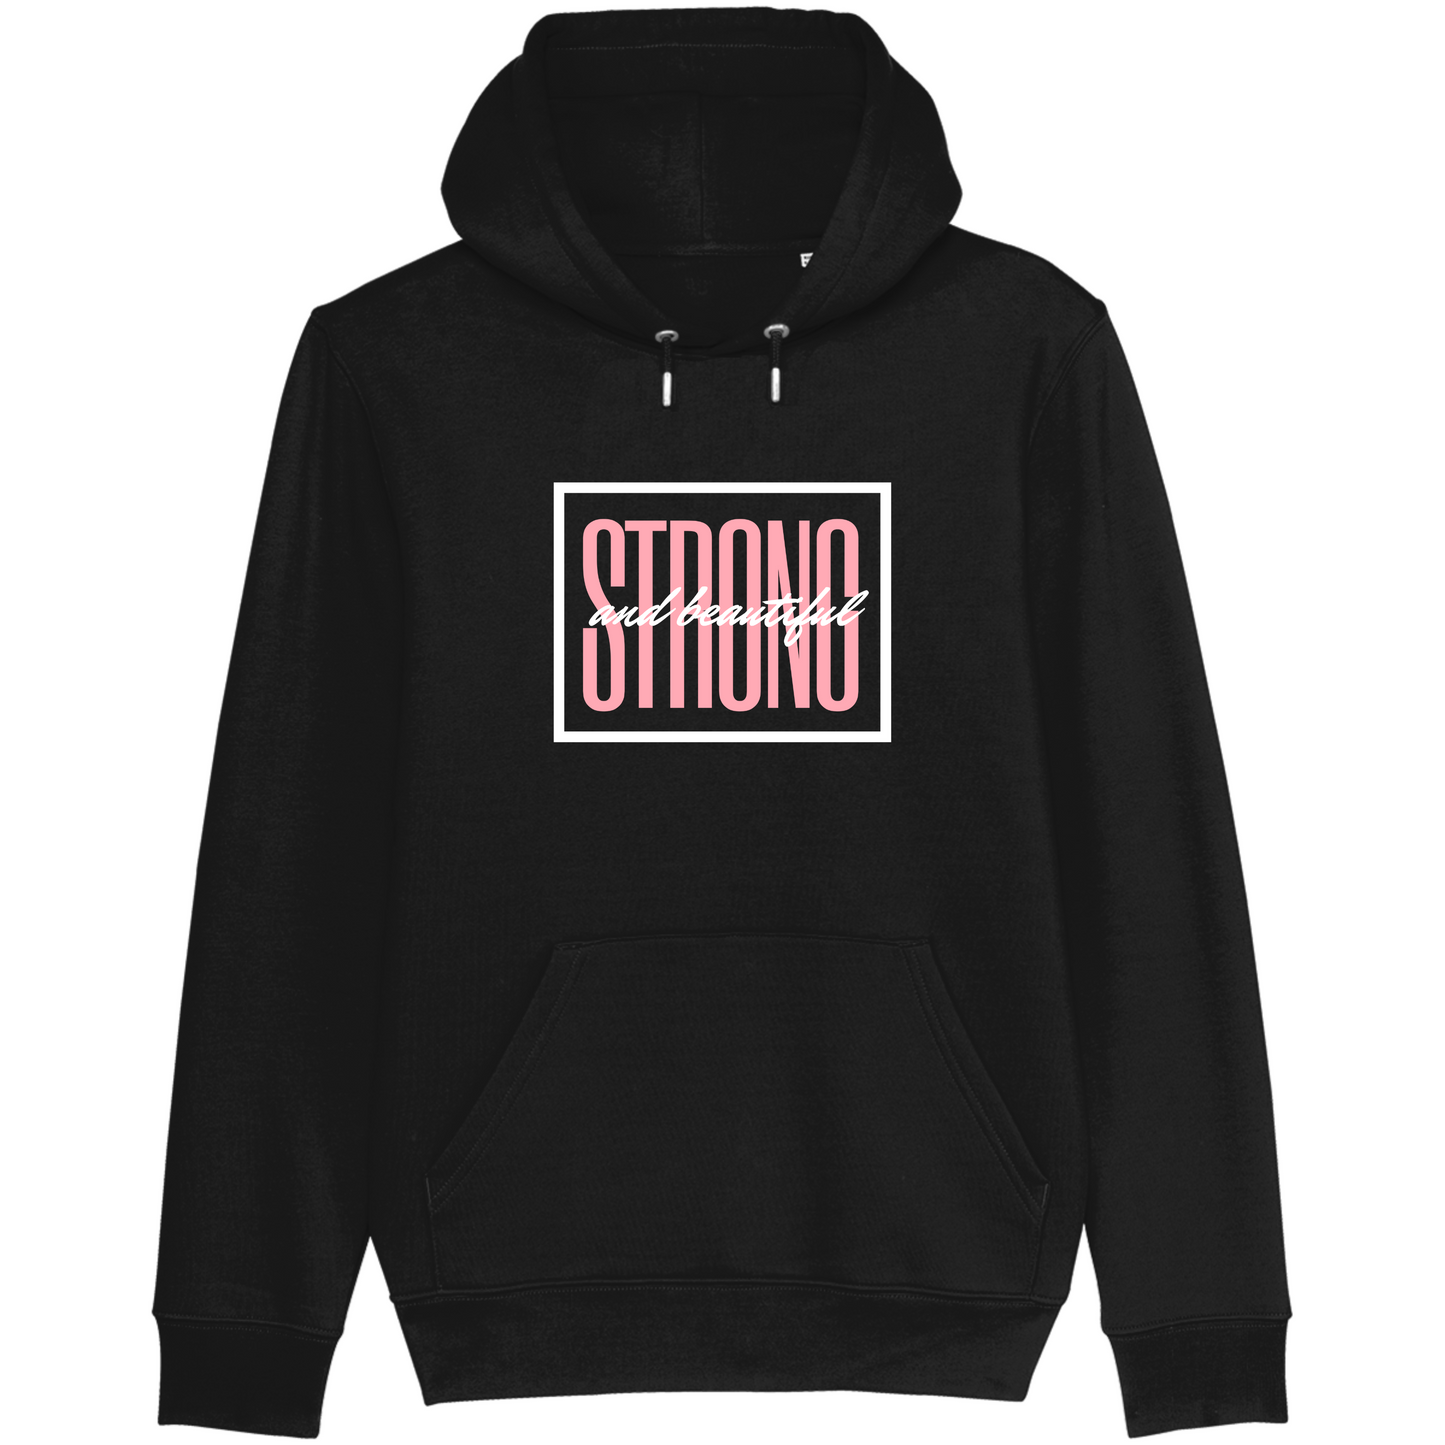 Strong and Beautiful - Hoodie